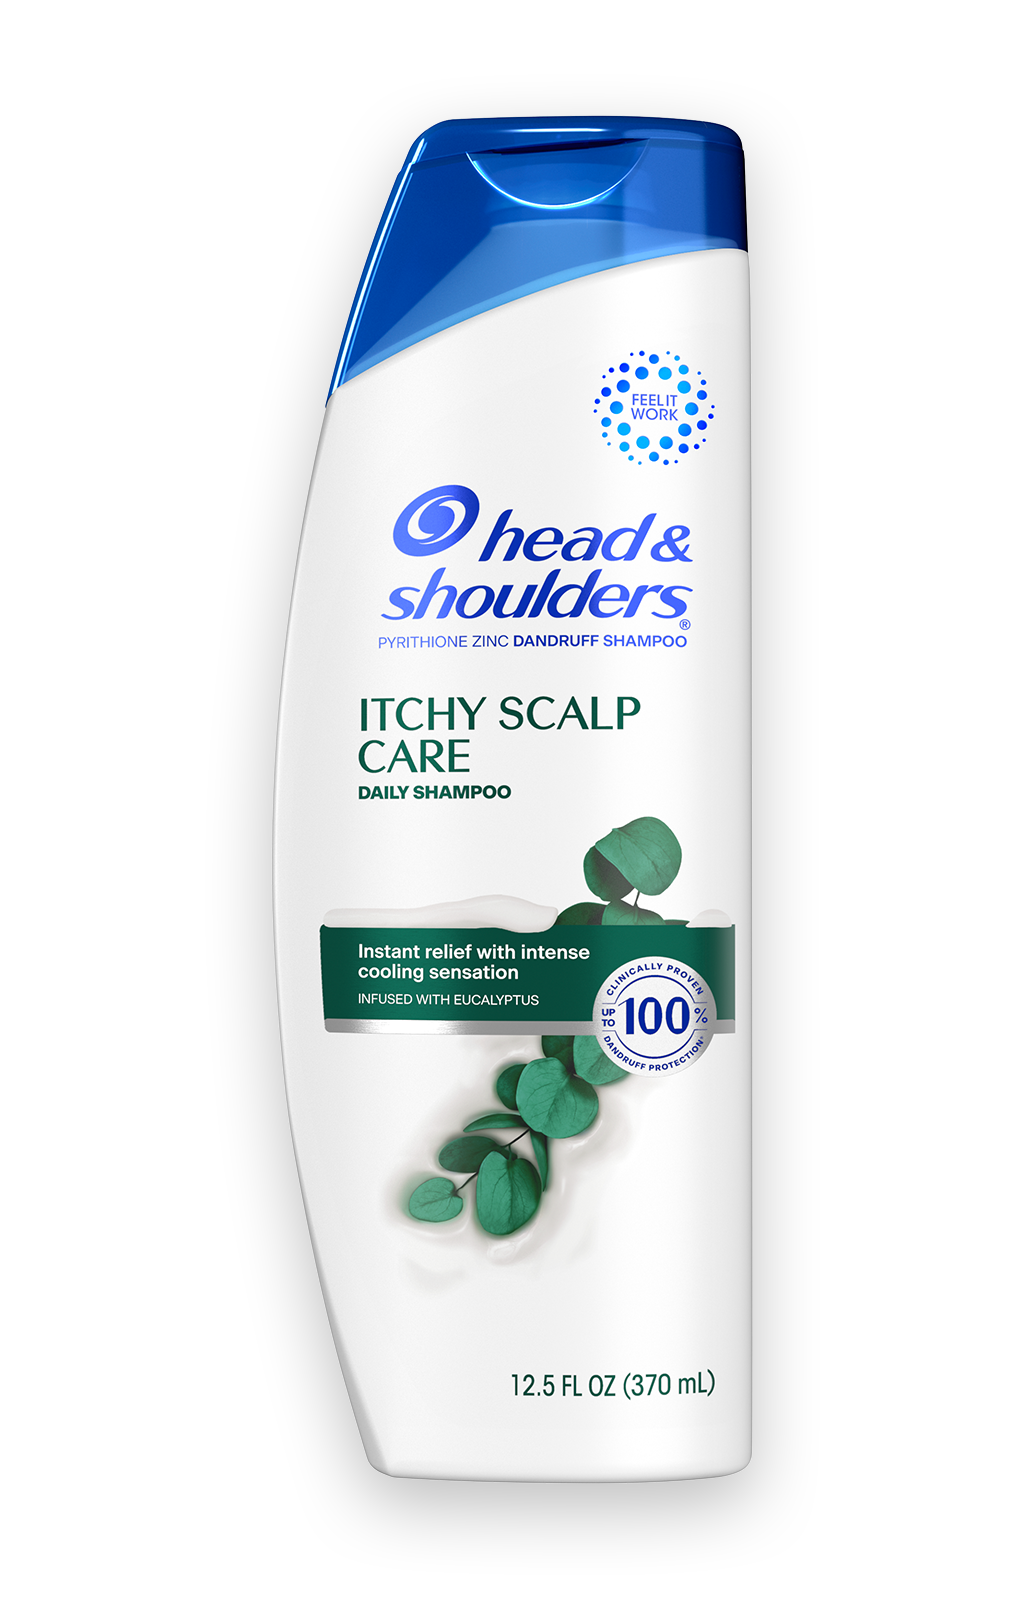 head & shoulders Itchy Scalp Care Daily Shampoo